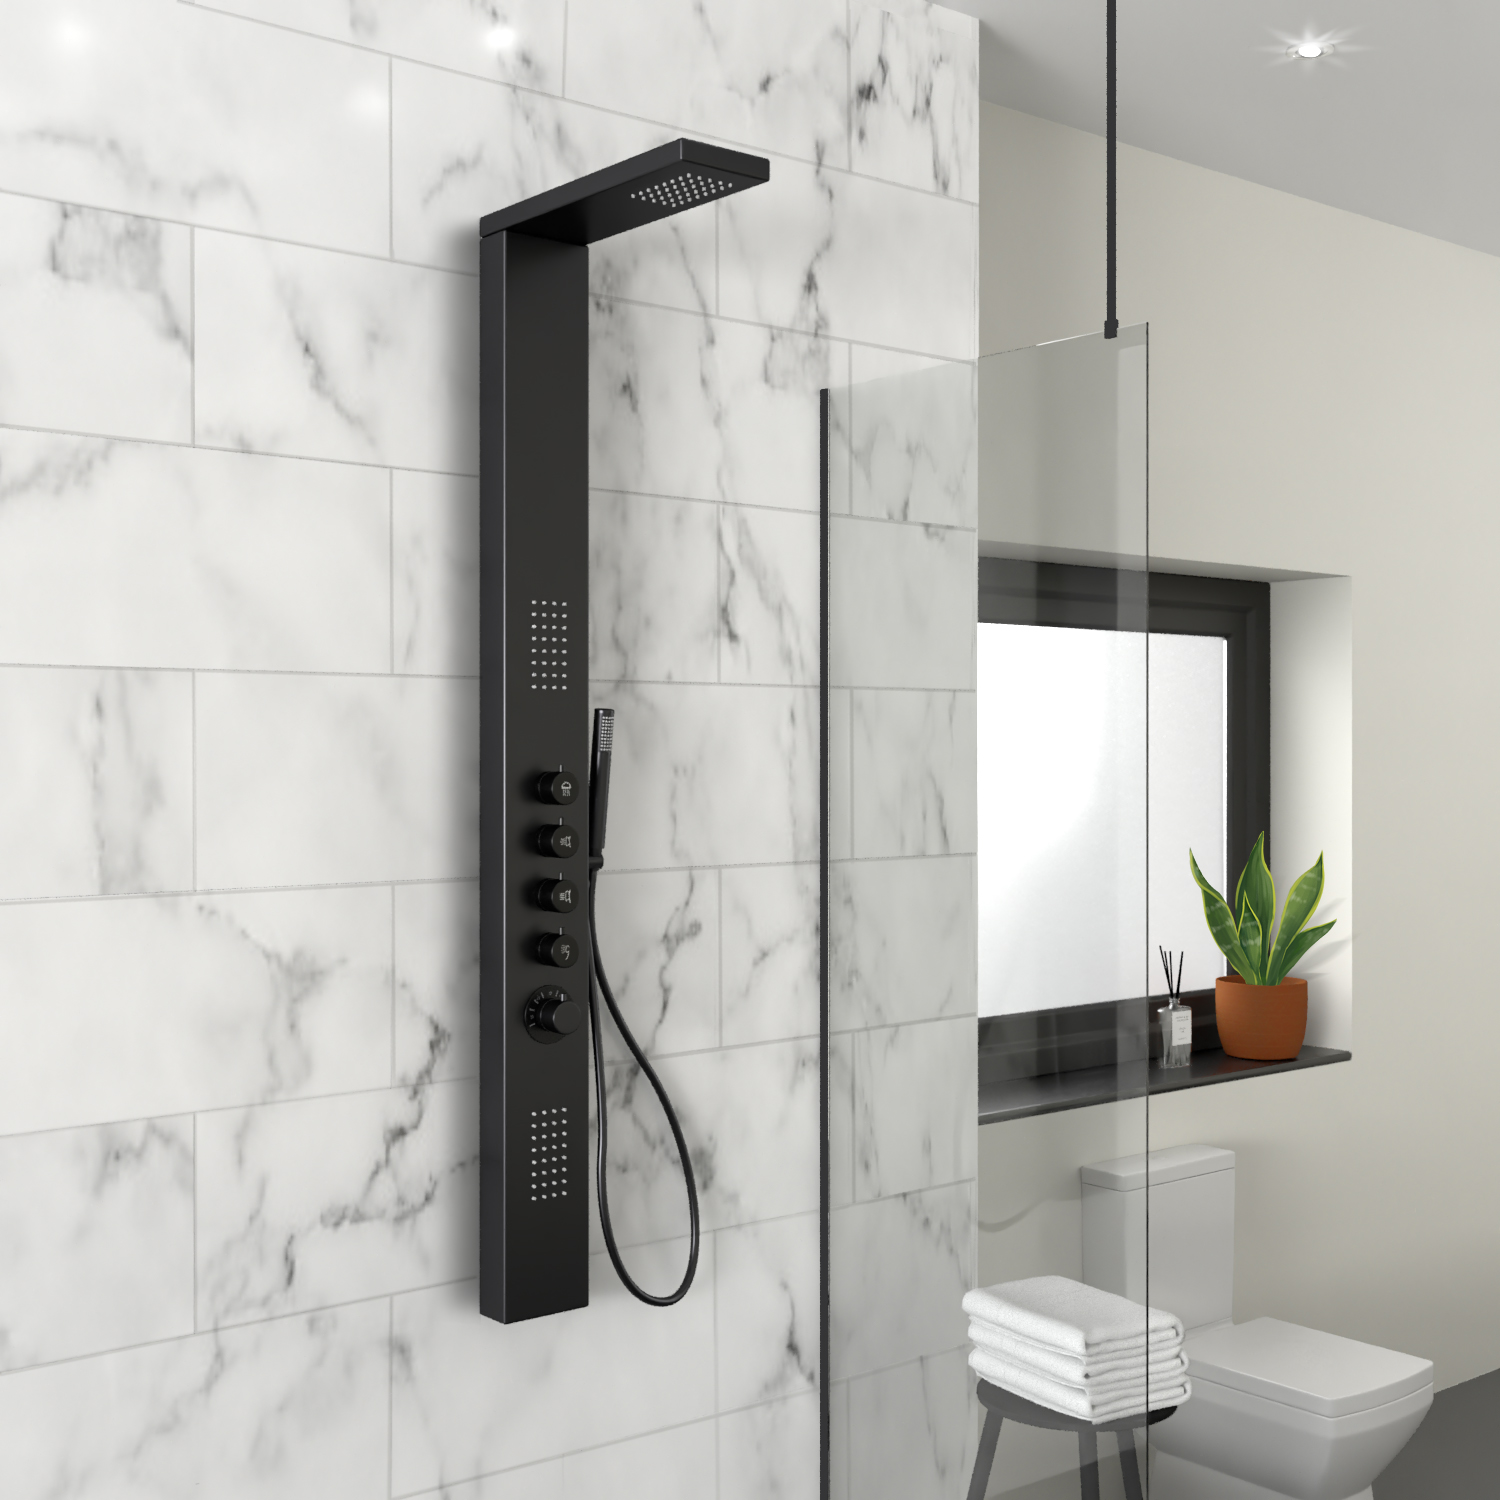 Modern bathroom with blac shower tower, glass shower panel and white modern toilet.